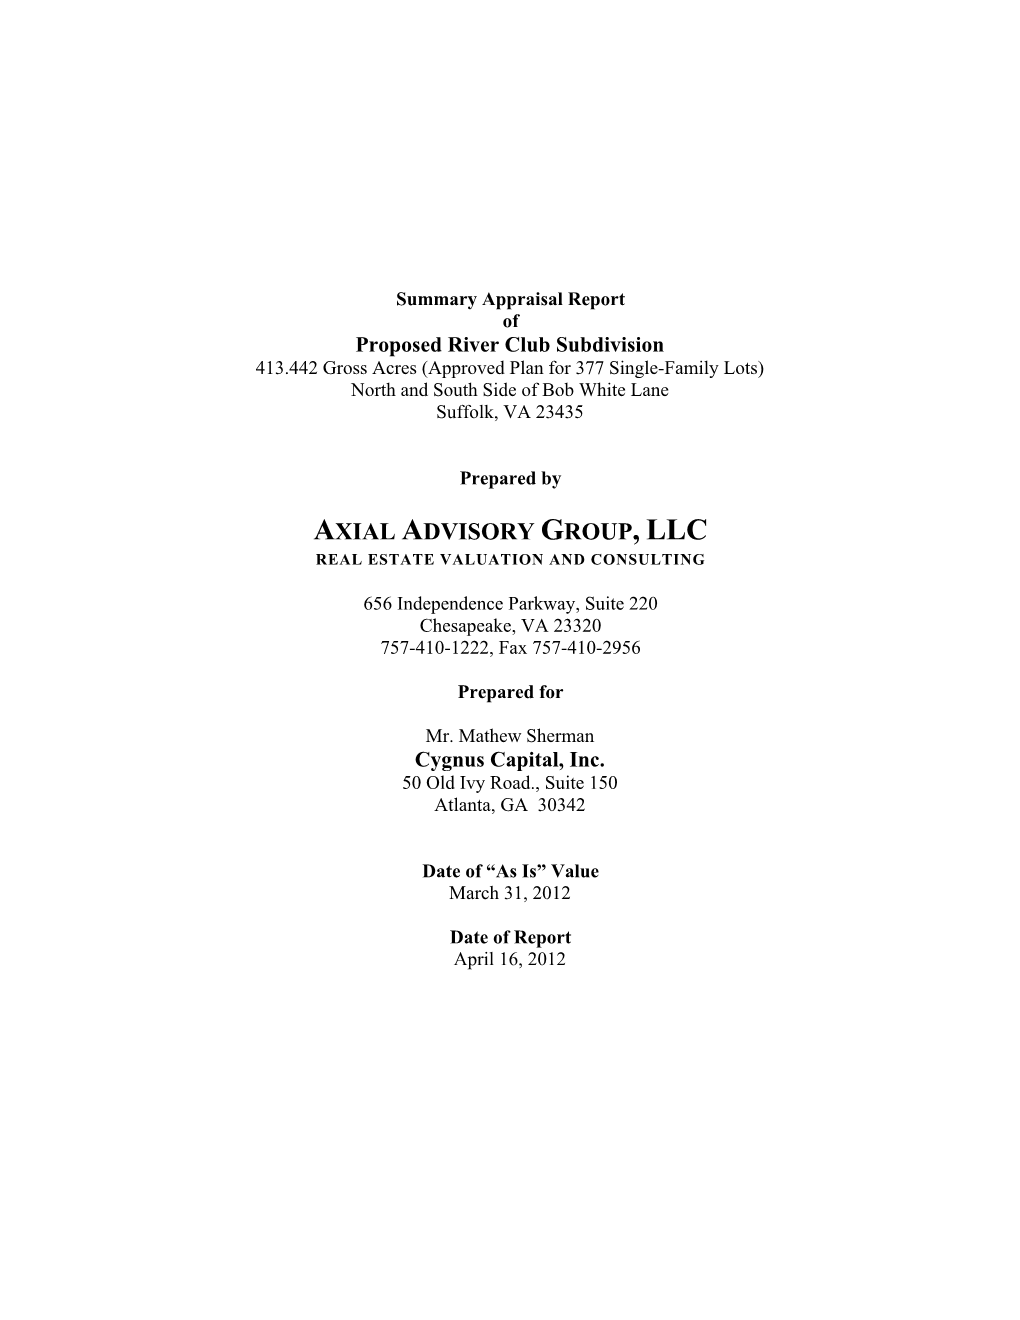 Axial Advisory Group, Llc Real Estate Valuation and Consulting